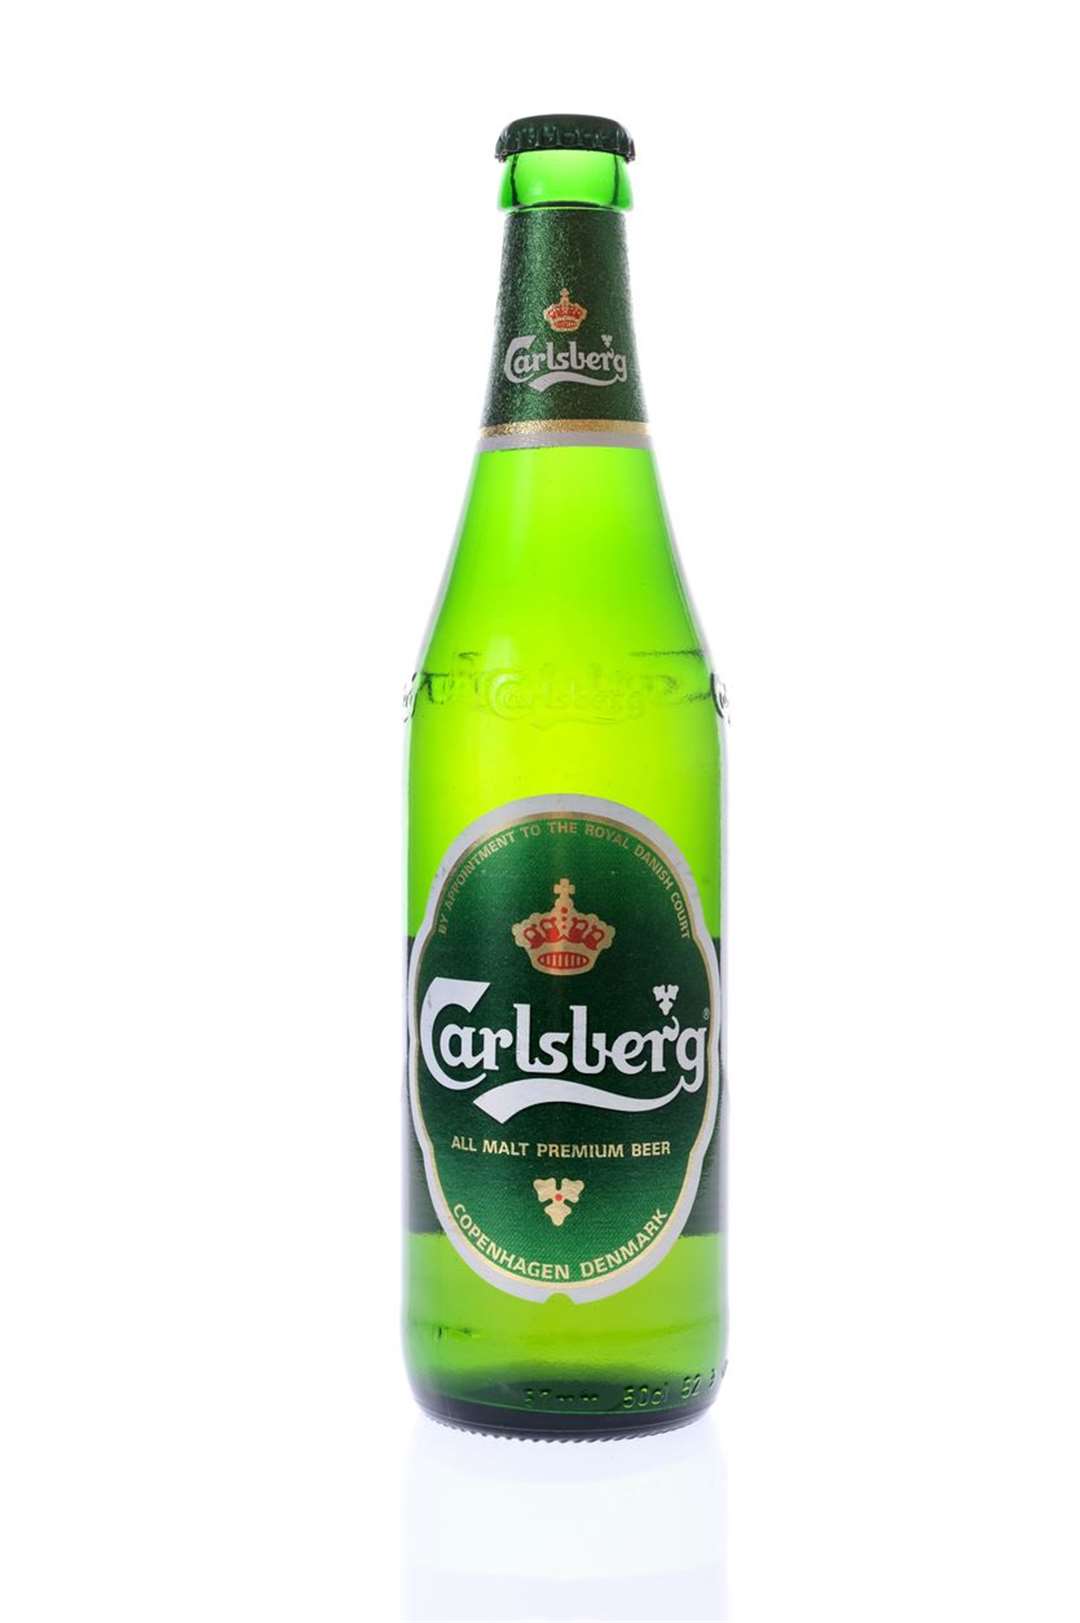 My husband went for the Carlsberg